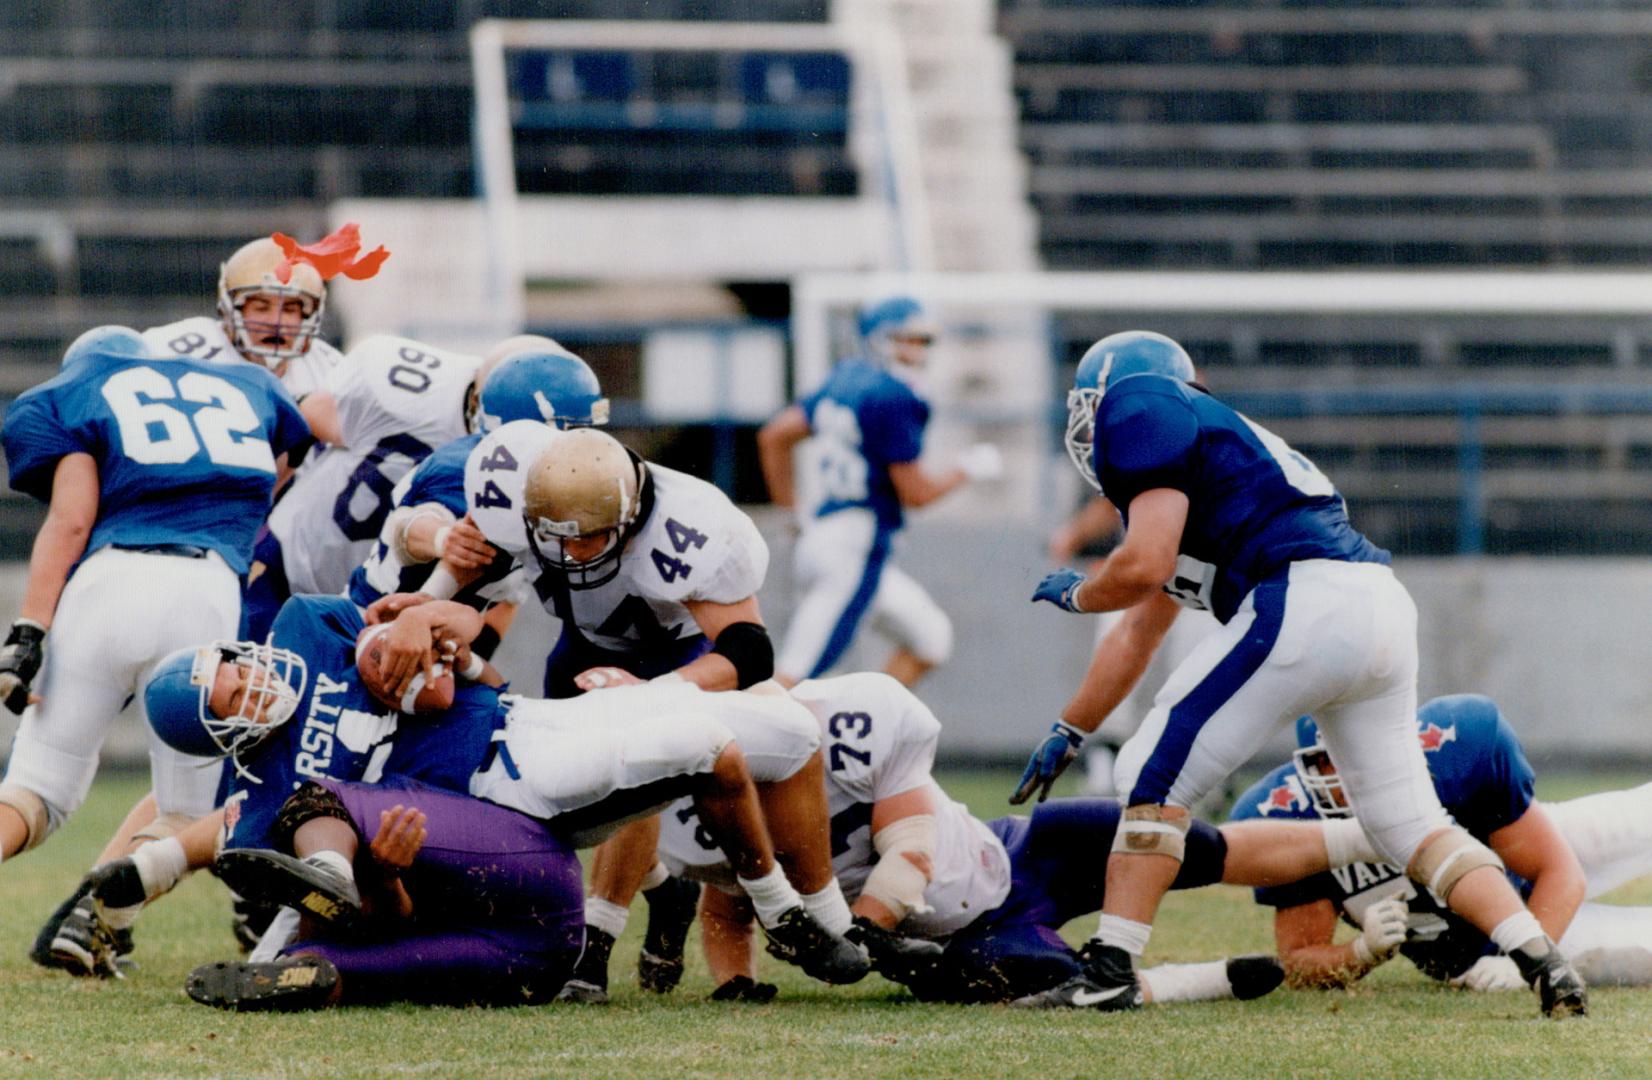 Football - College - Action 1990